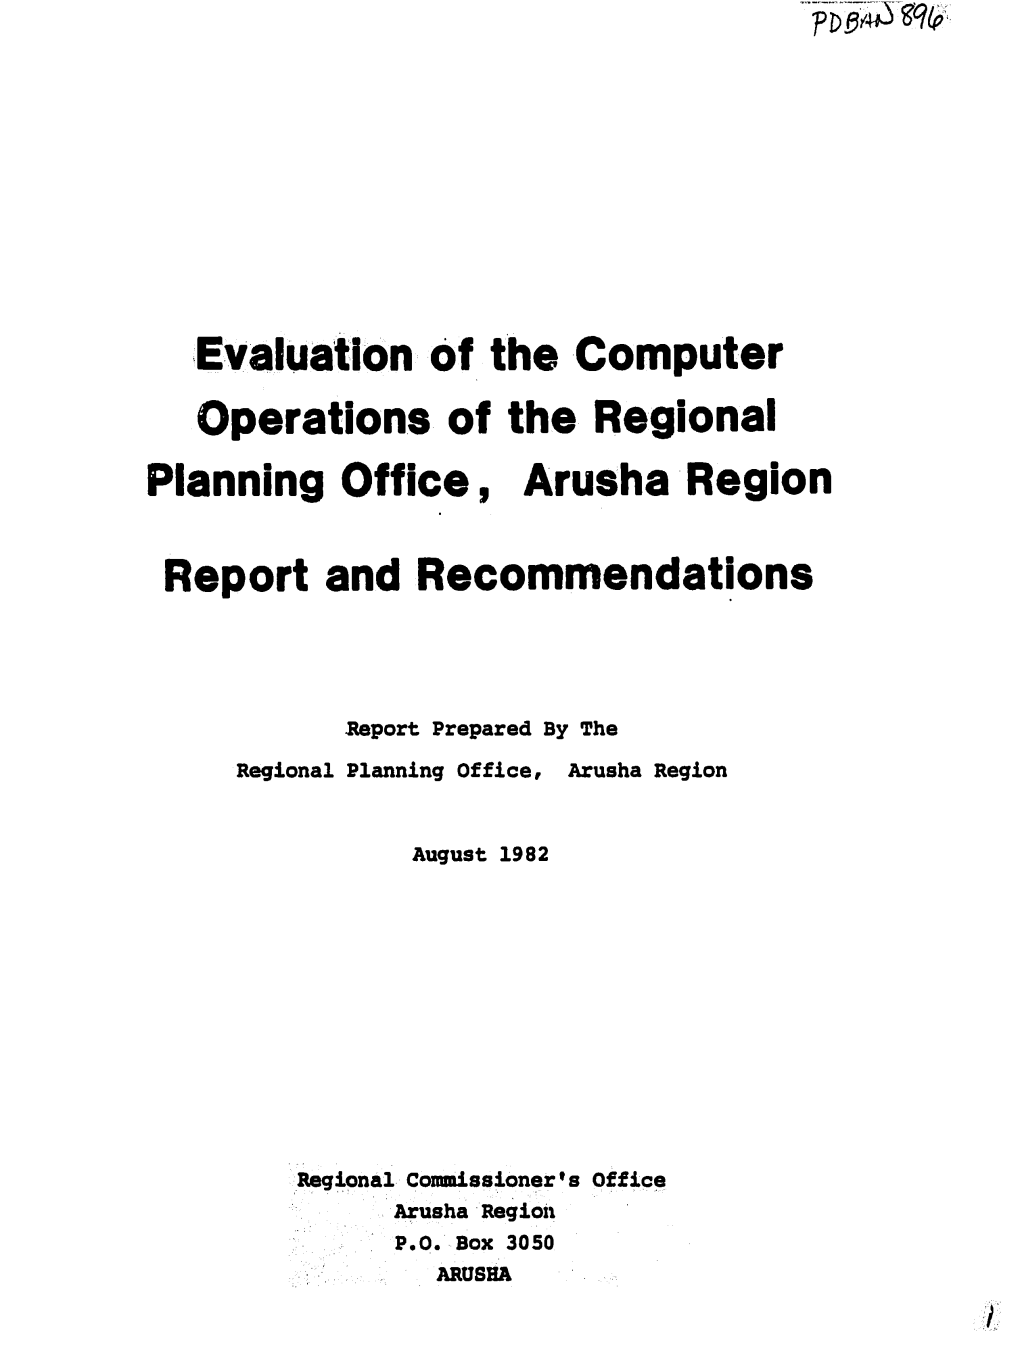 Evaluation of the Computer Operations of the Regional Planning Office, Arusha Region